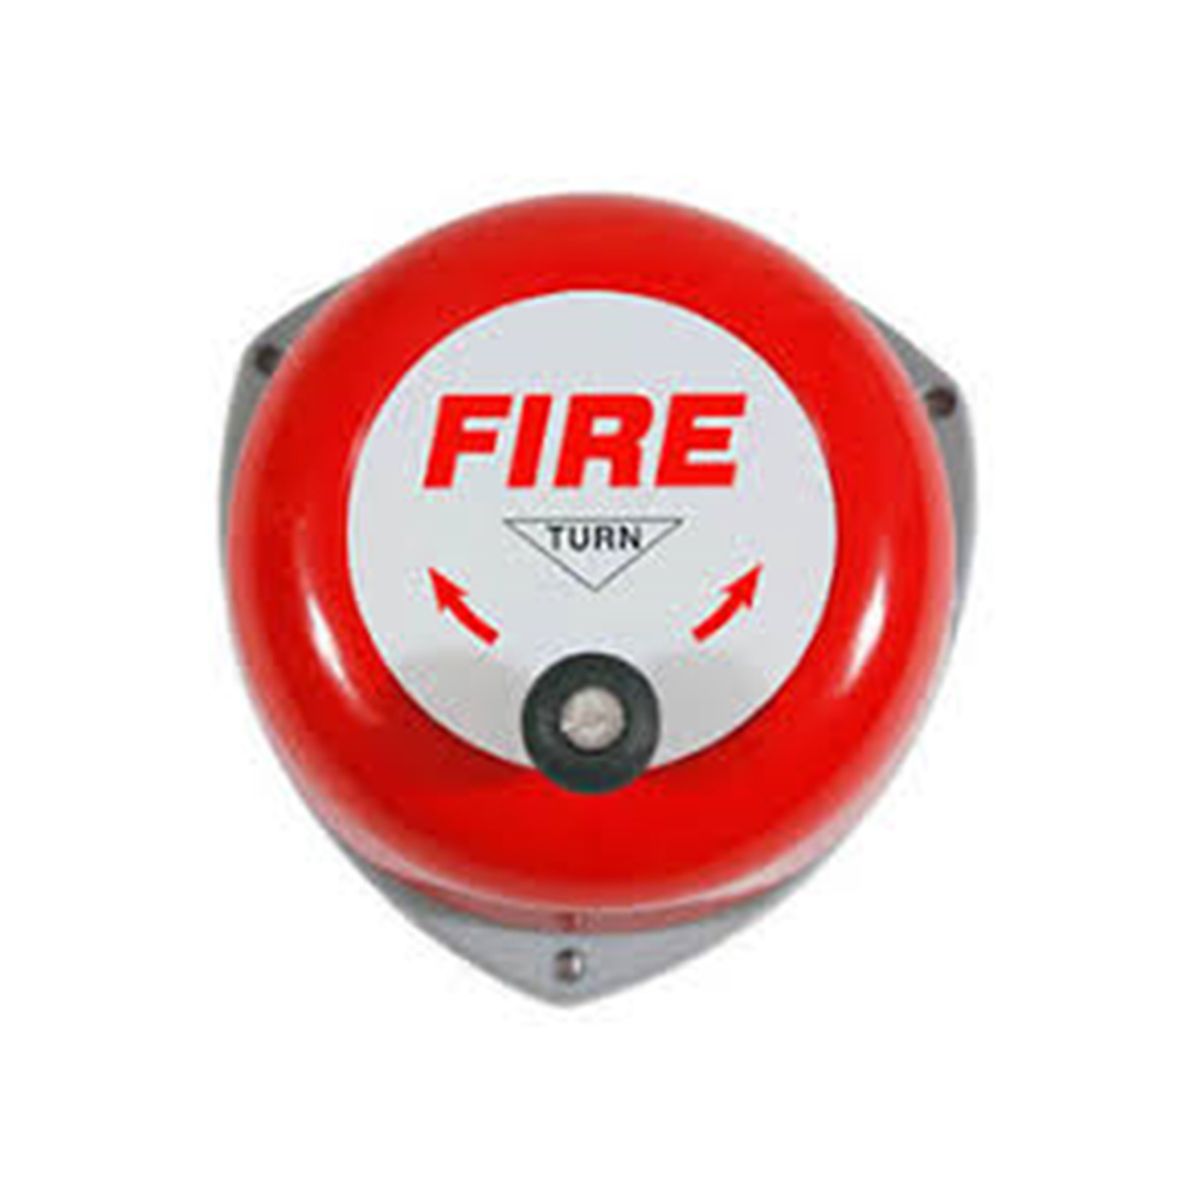 Rotary fire alarm bell